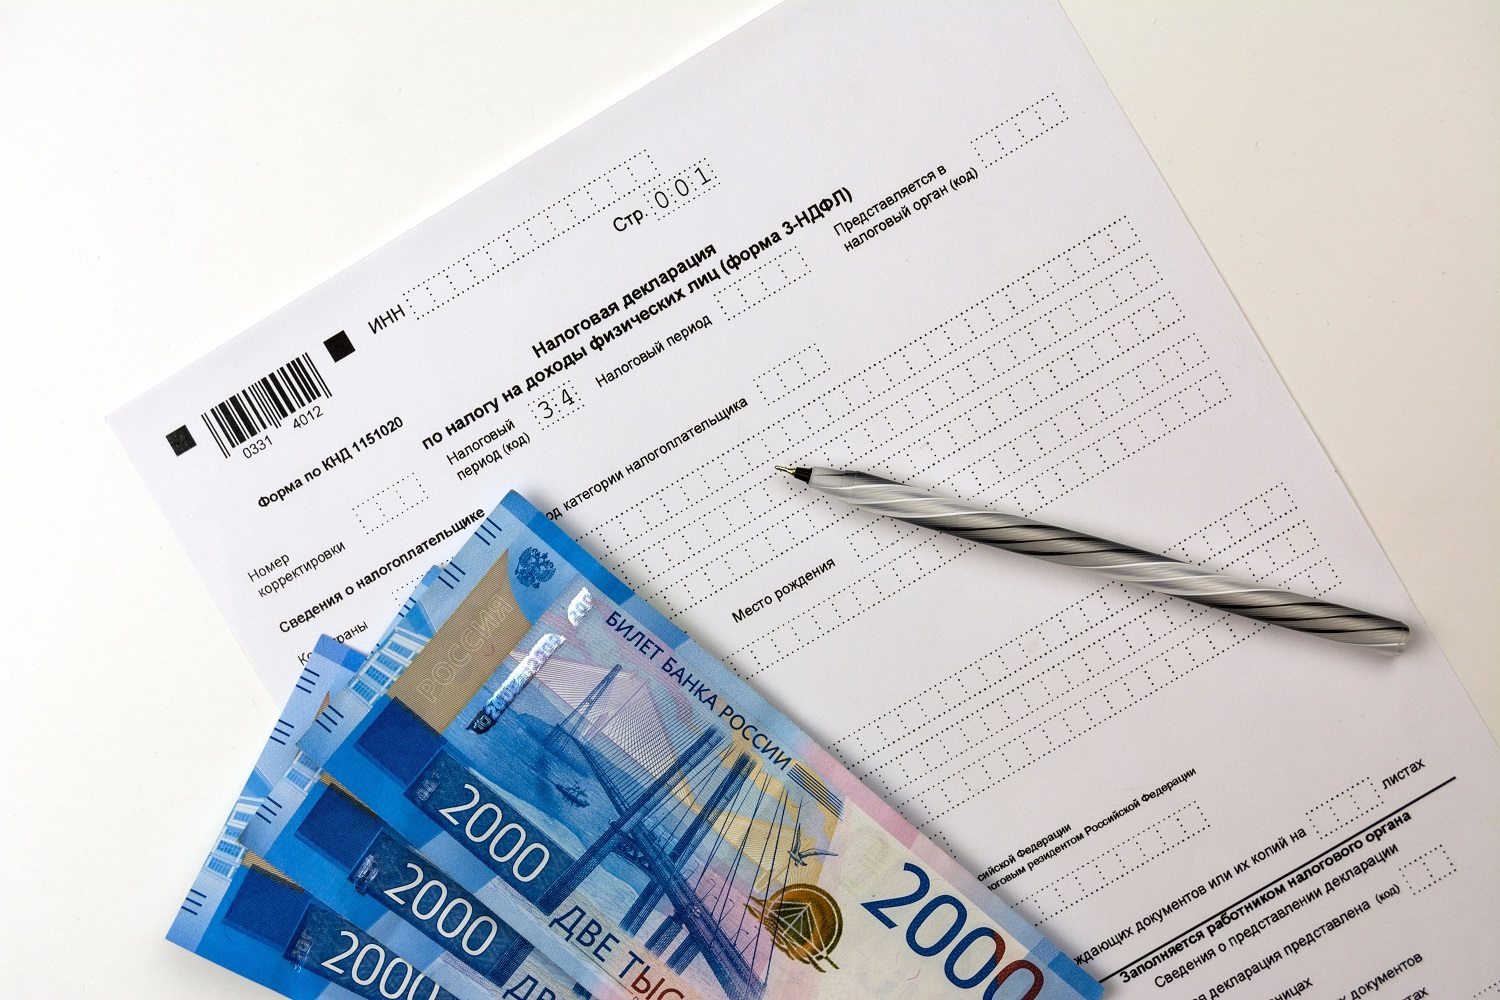 A blank copy of the Russian tax return form, ruble banknotes and a pen rest on a table.